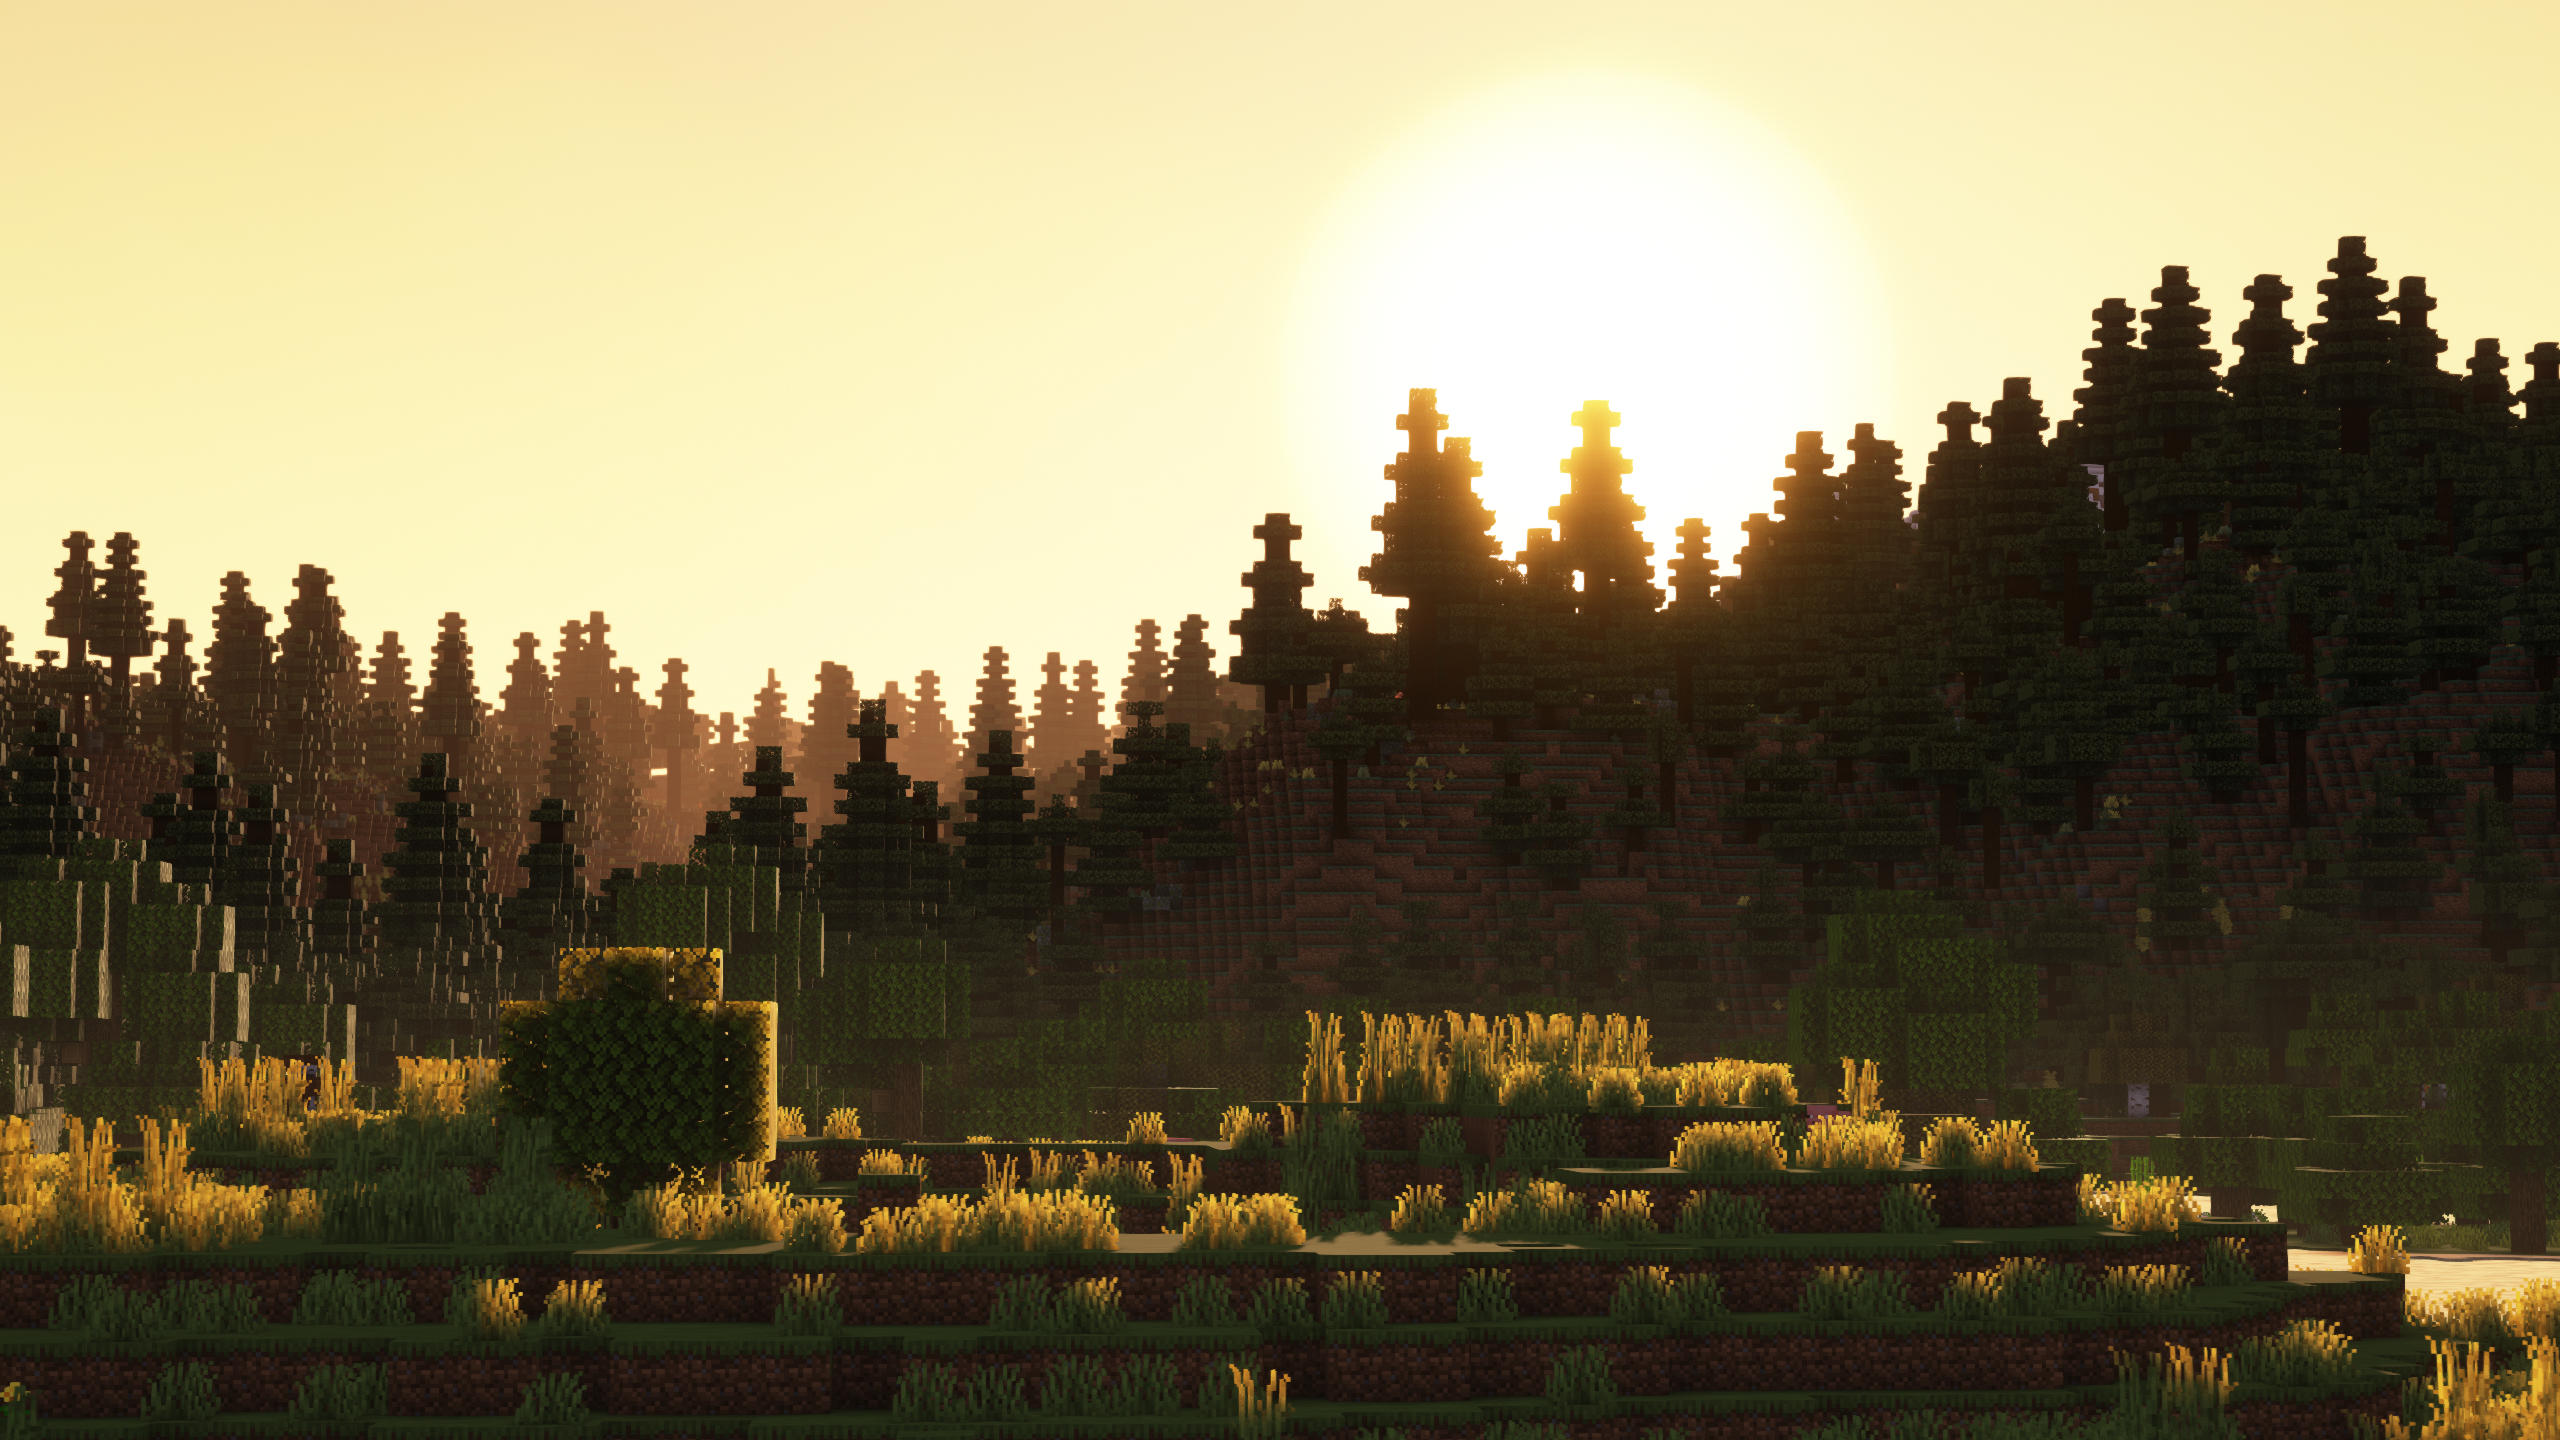 General 2560x1440 Minecraft outdoors shaders sun rays video games grass trees CGI nature